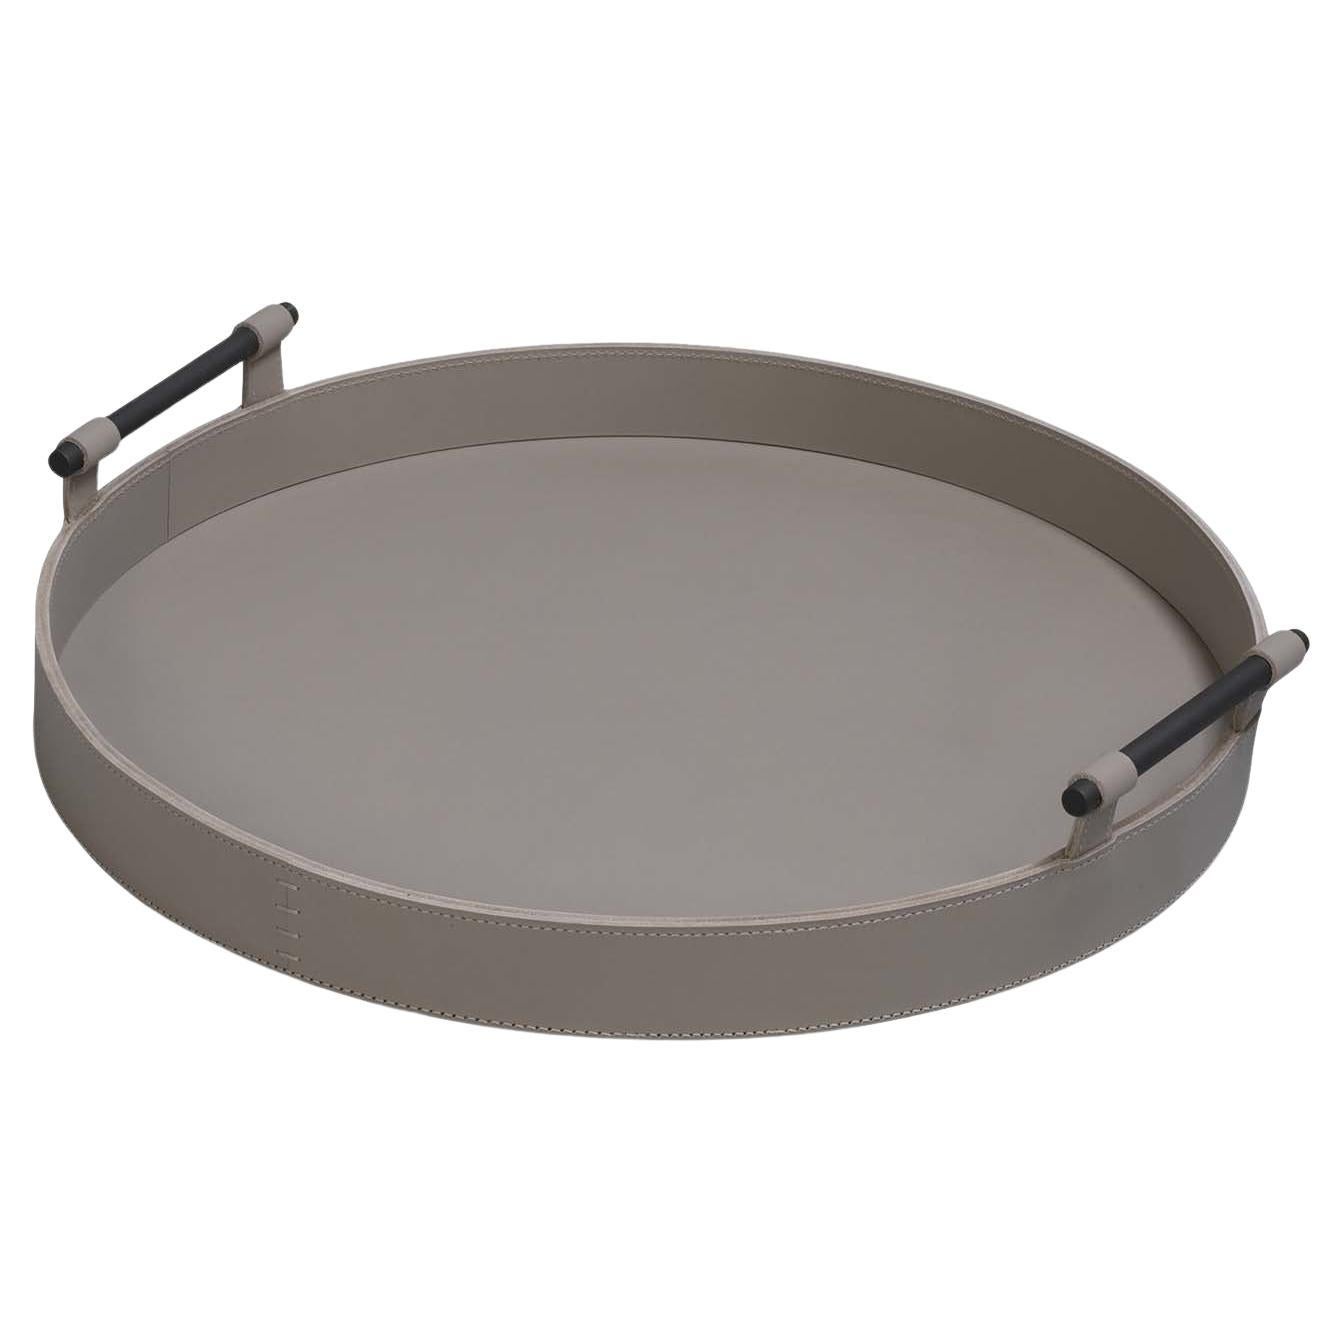 Portofino Large Round Tray In Sand Leather For Sale